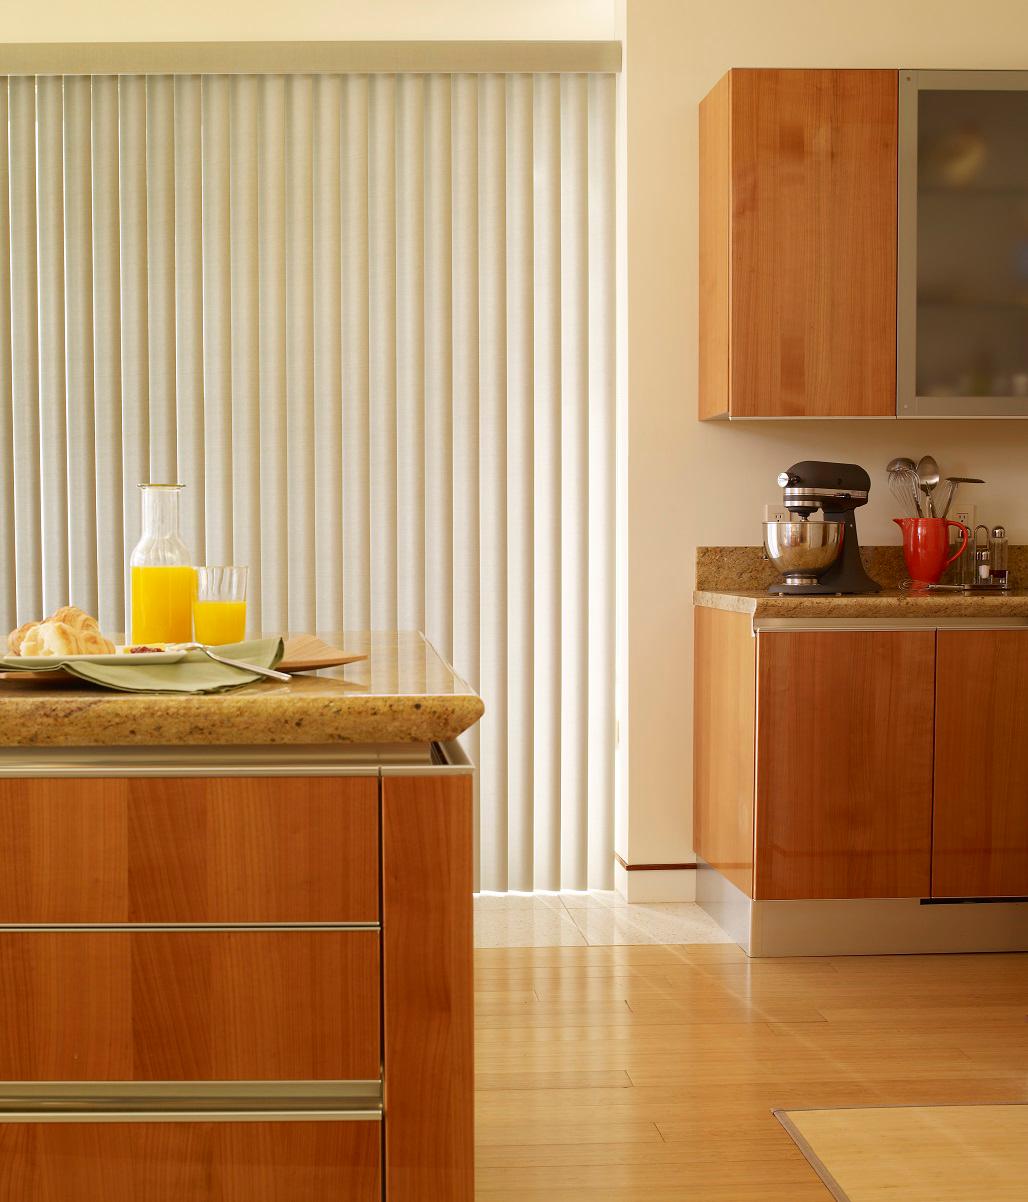 Ready to be enlightened? Then try our Enlightened Vertical Blinds! They're sleek,  easy to use, perfect for both windows and sliding doors-and they look amazing in this kitchen.  BudgetBlindsTysonsCornerHerndon   VerticalBlinds  FreeConsultation  WindowWednesday